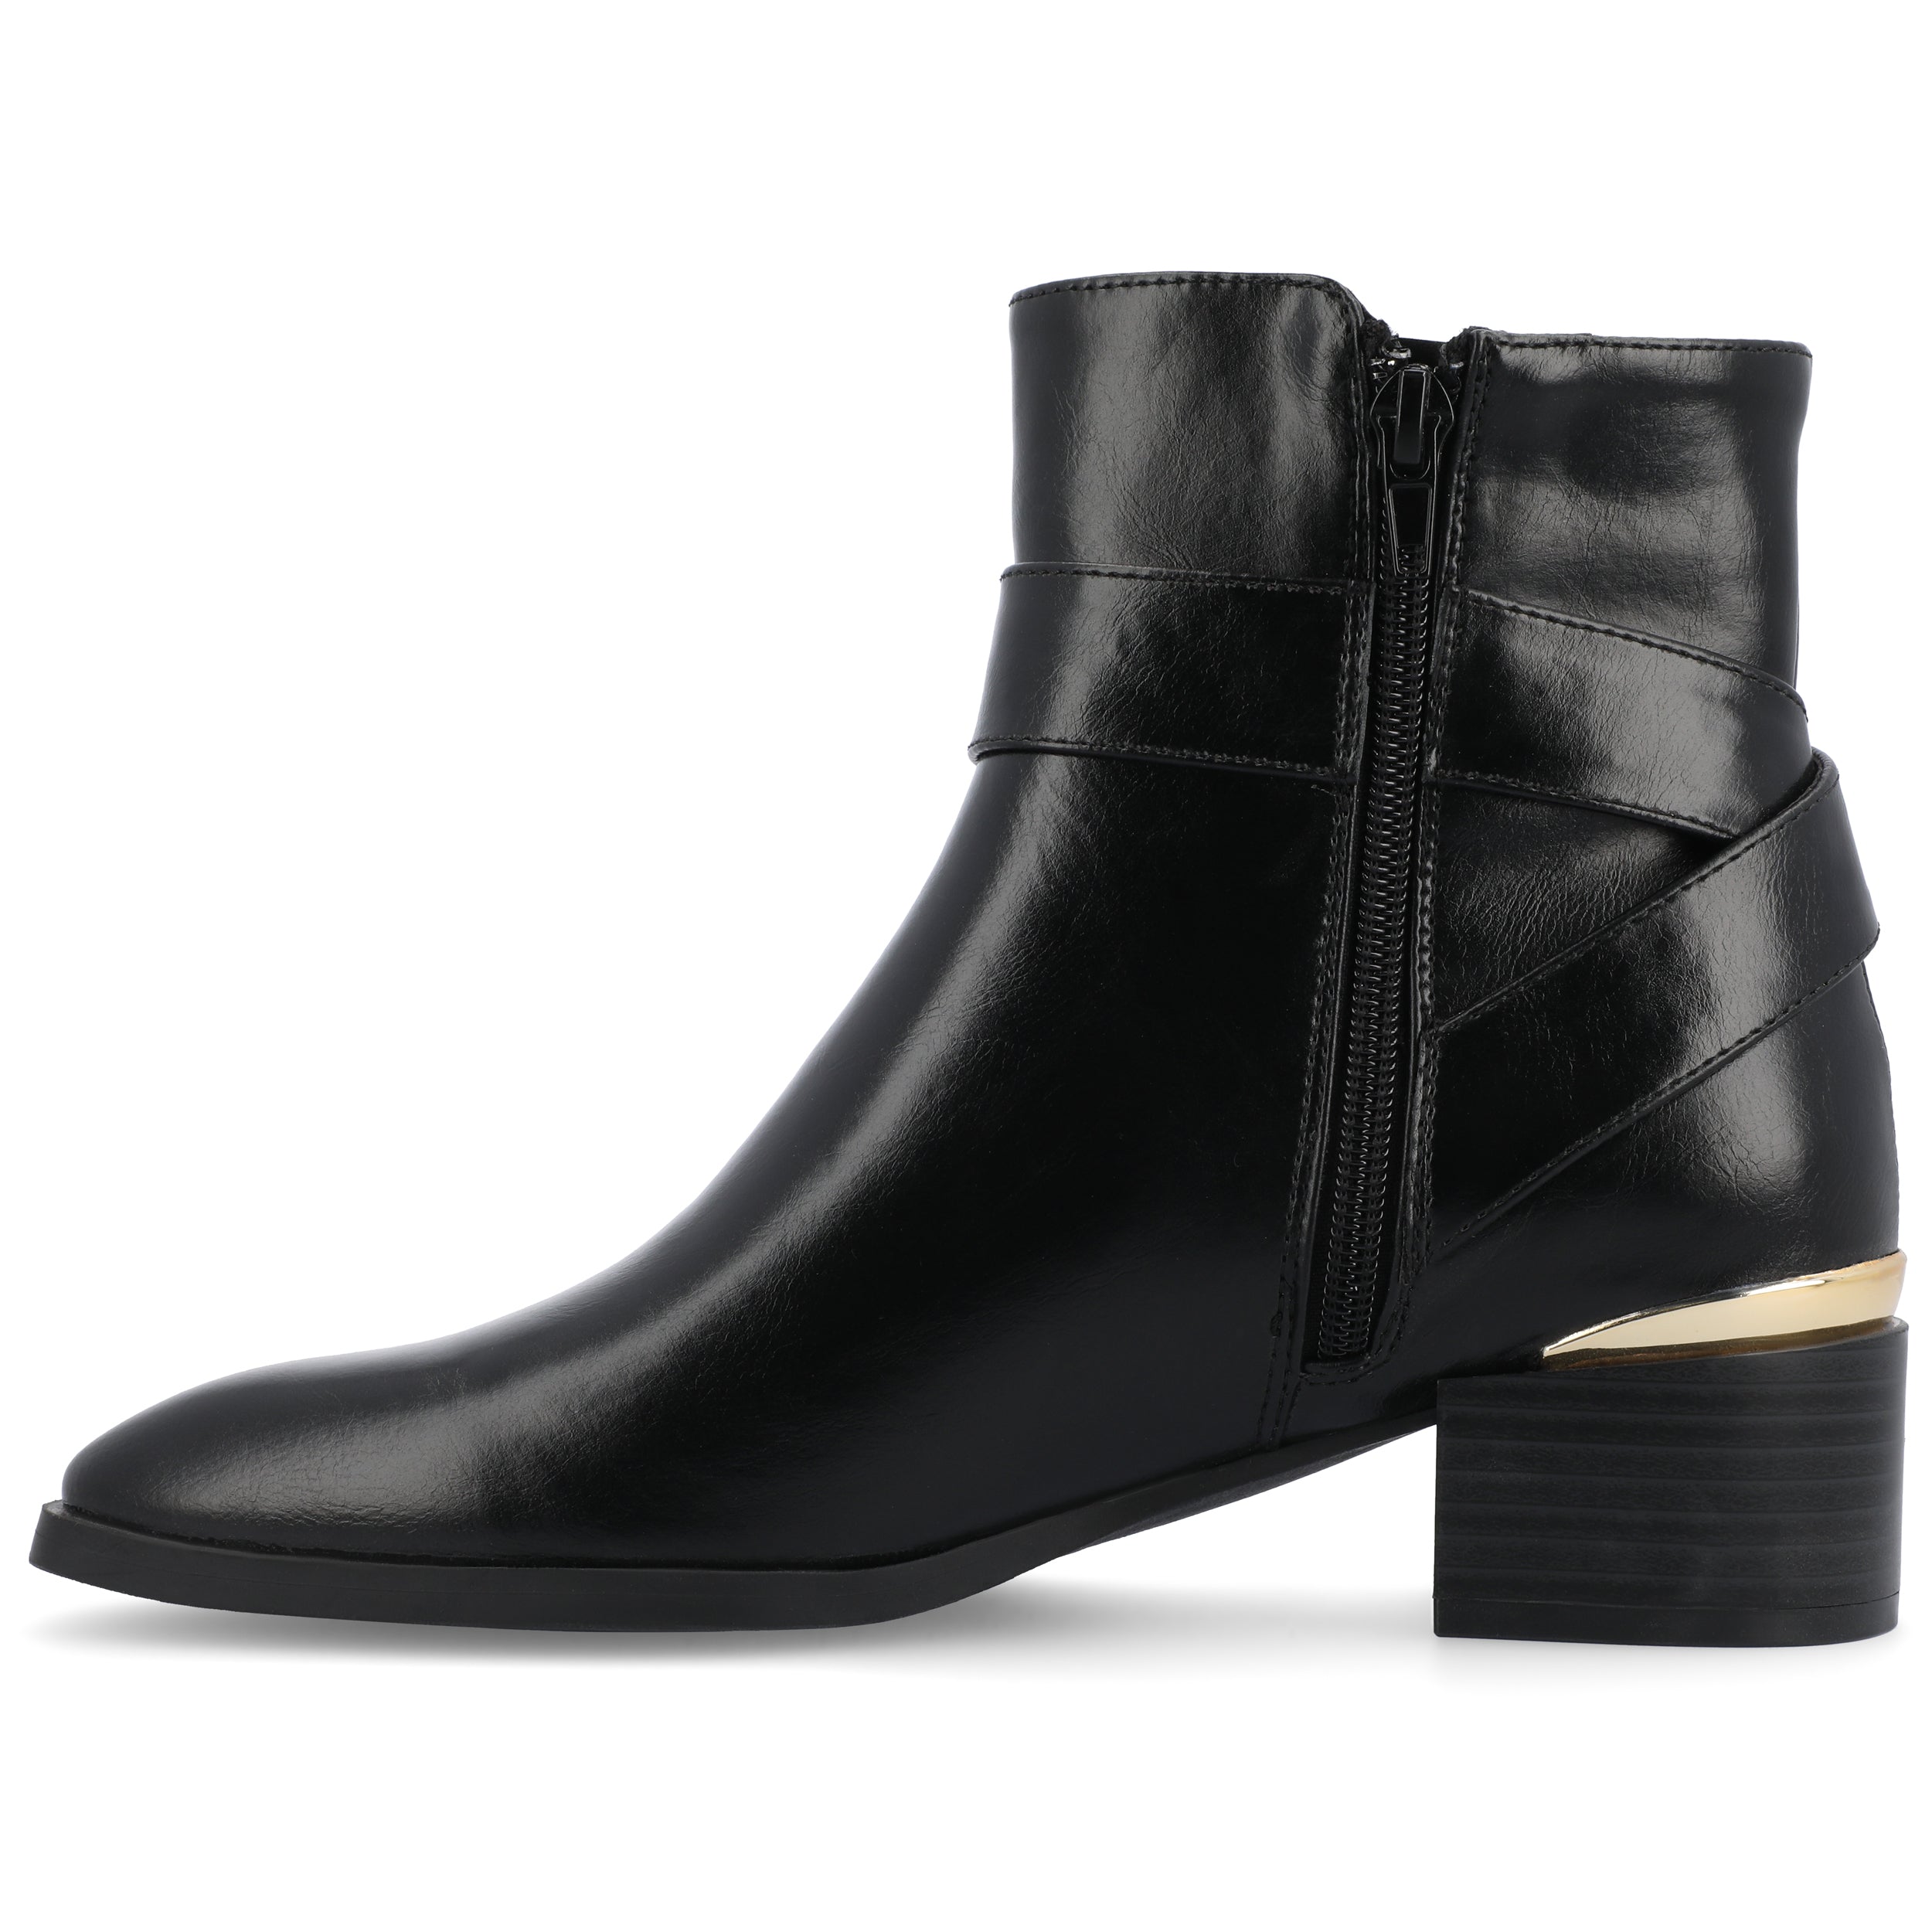 Clarice leather ankle boots